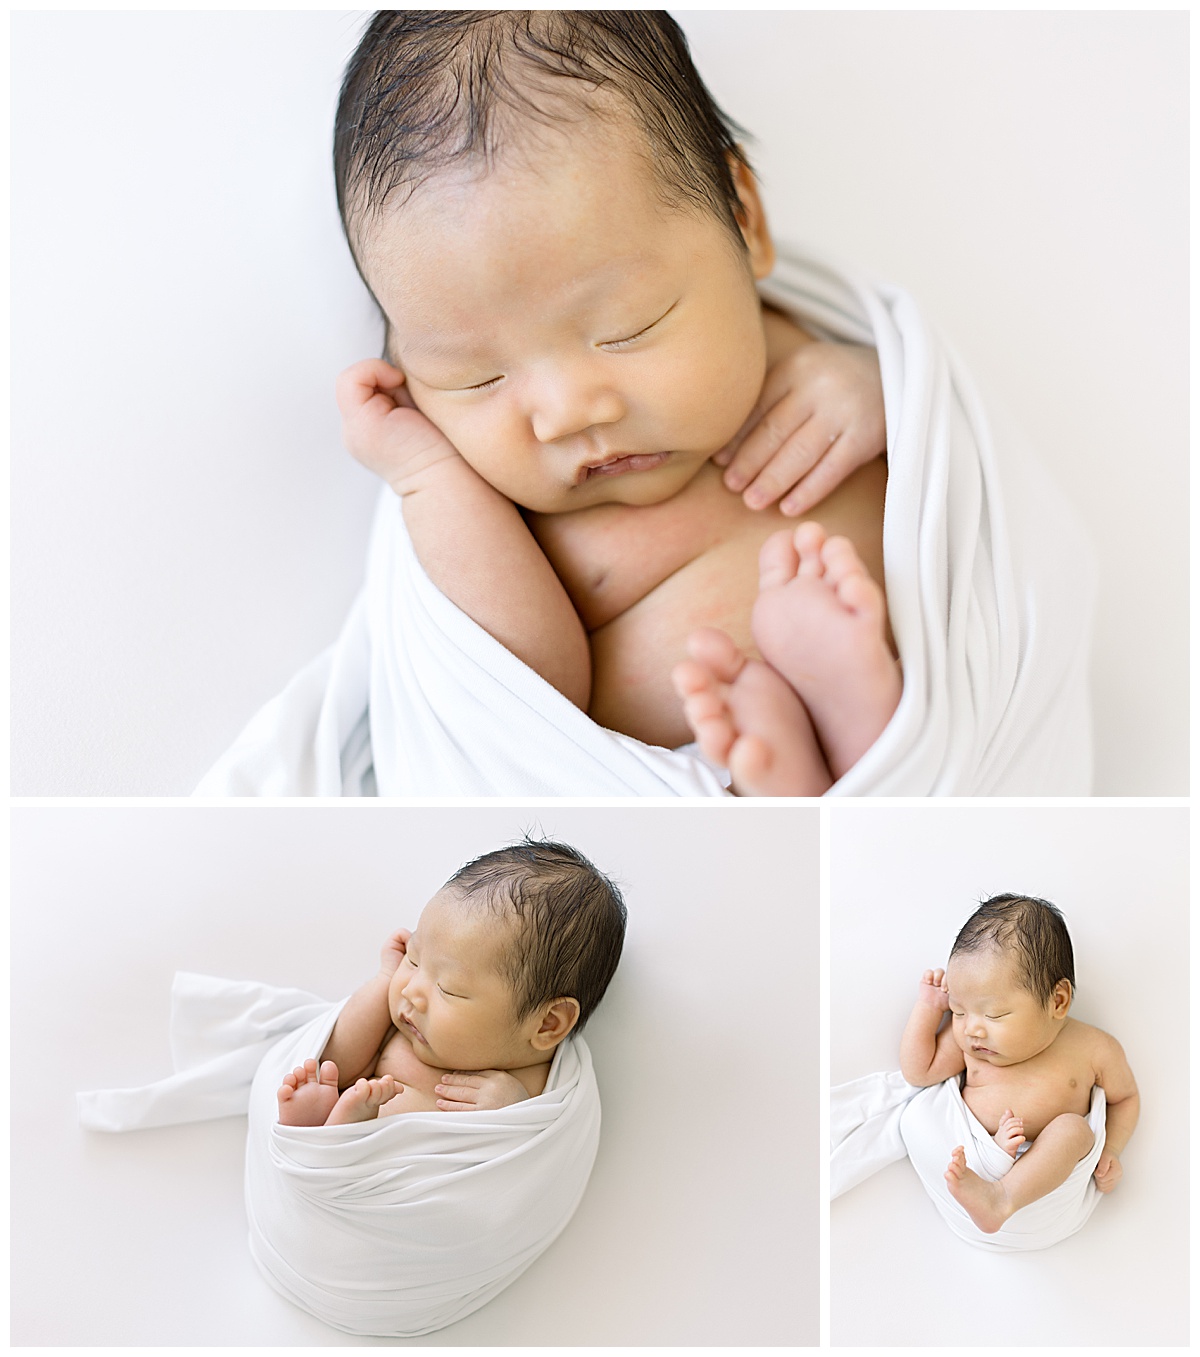 newborn baby swaddled in white blanket newborn photography session